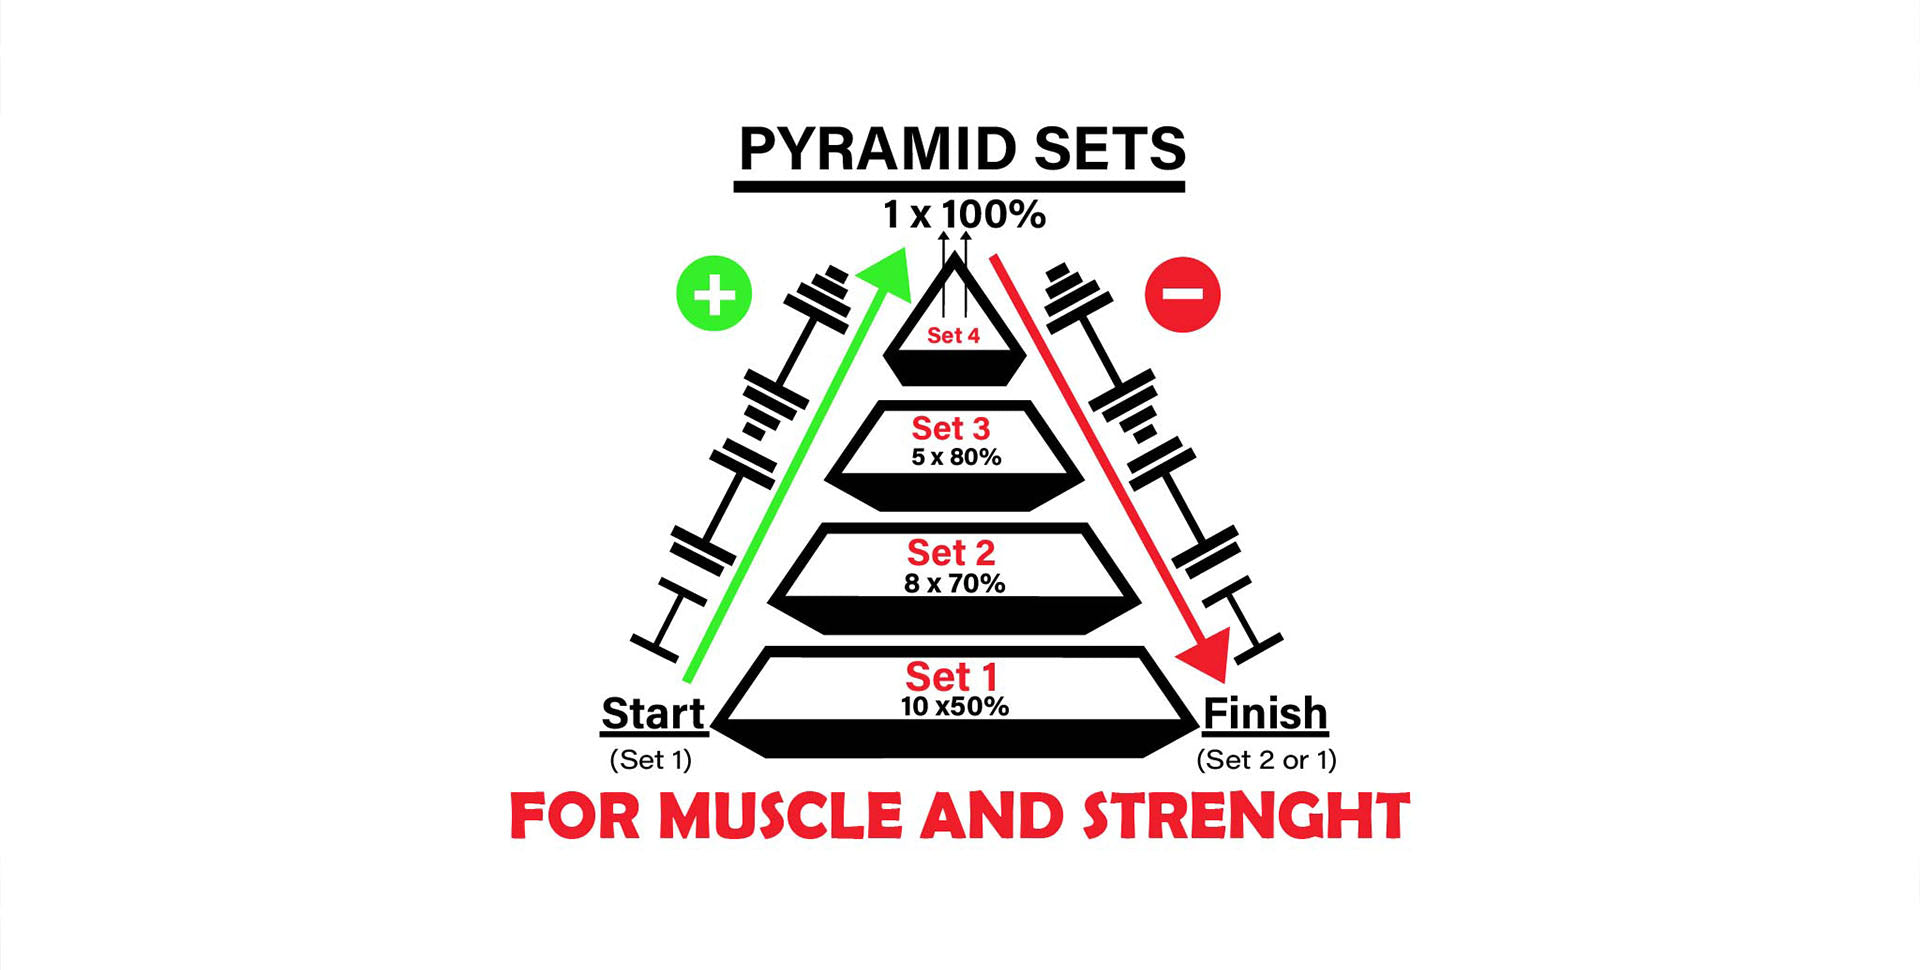 Triangle Strategy Tips: 10 Things To Know Before Starting